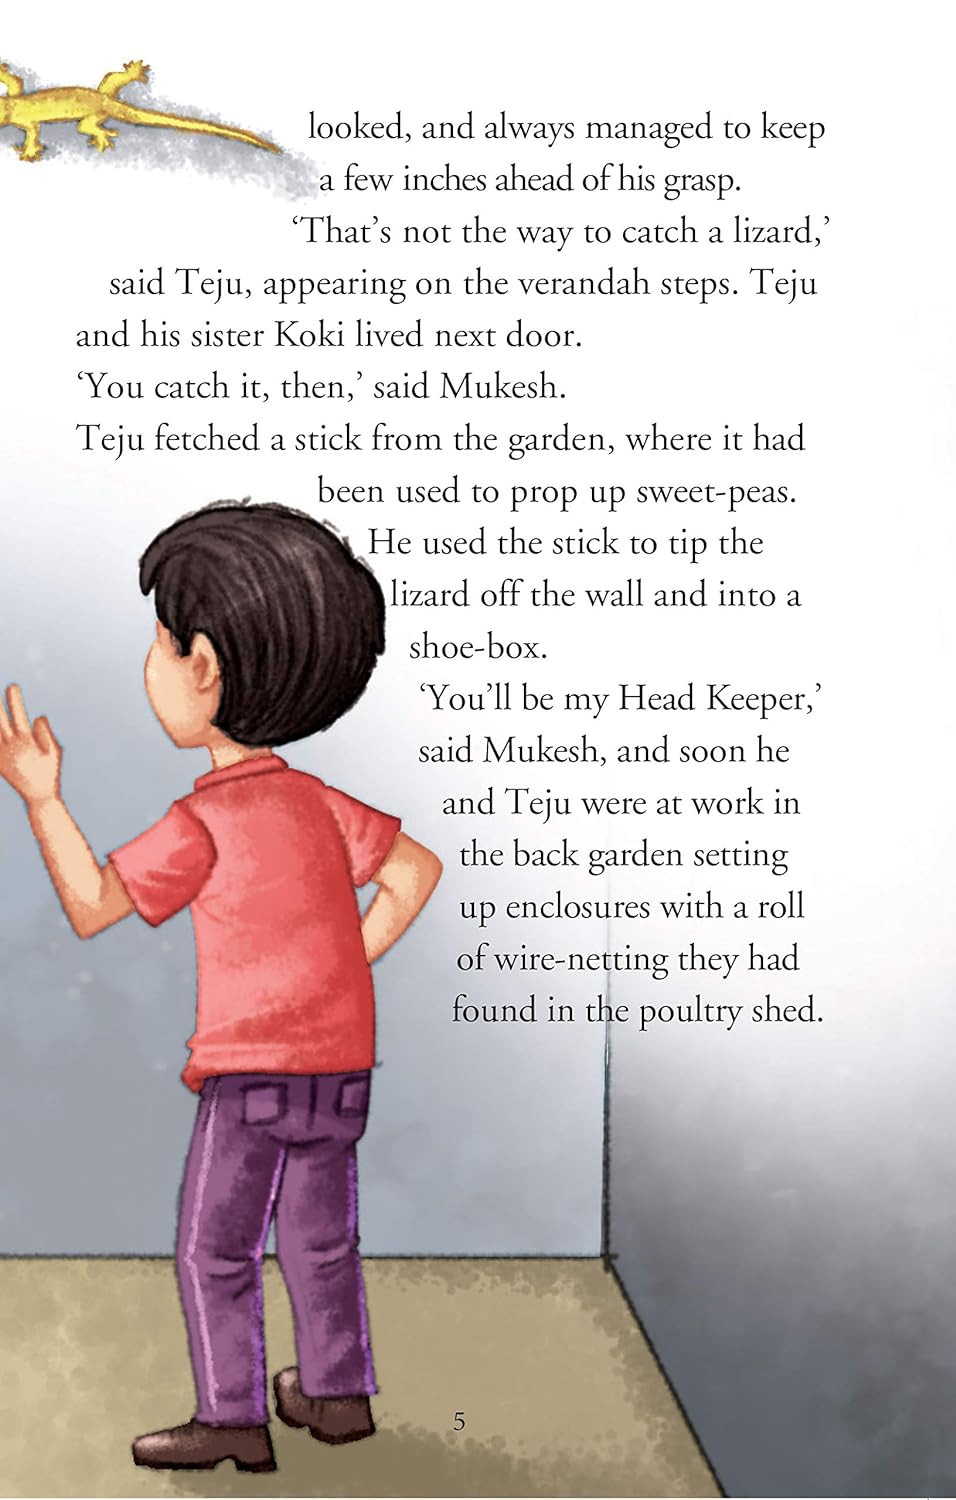 Pegasus Ruskin Bond - Tales from the Childhood